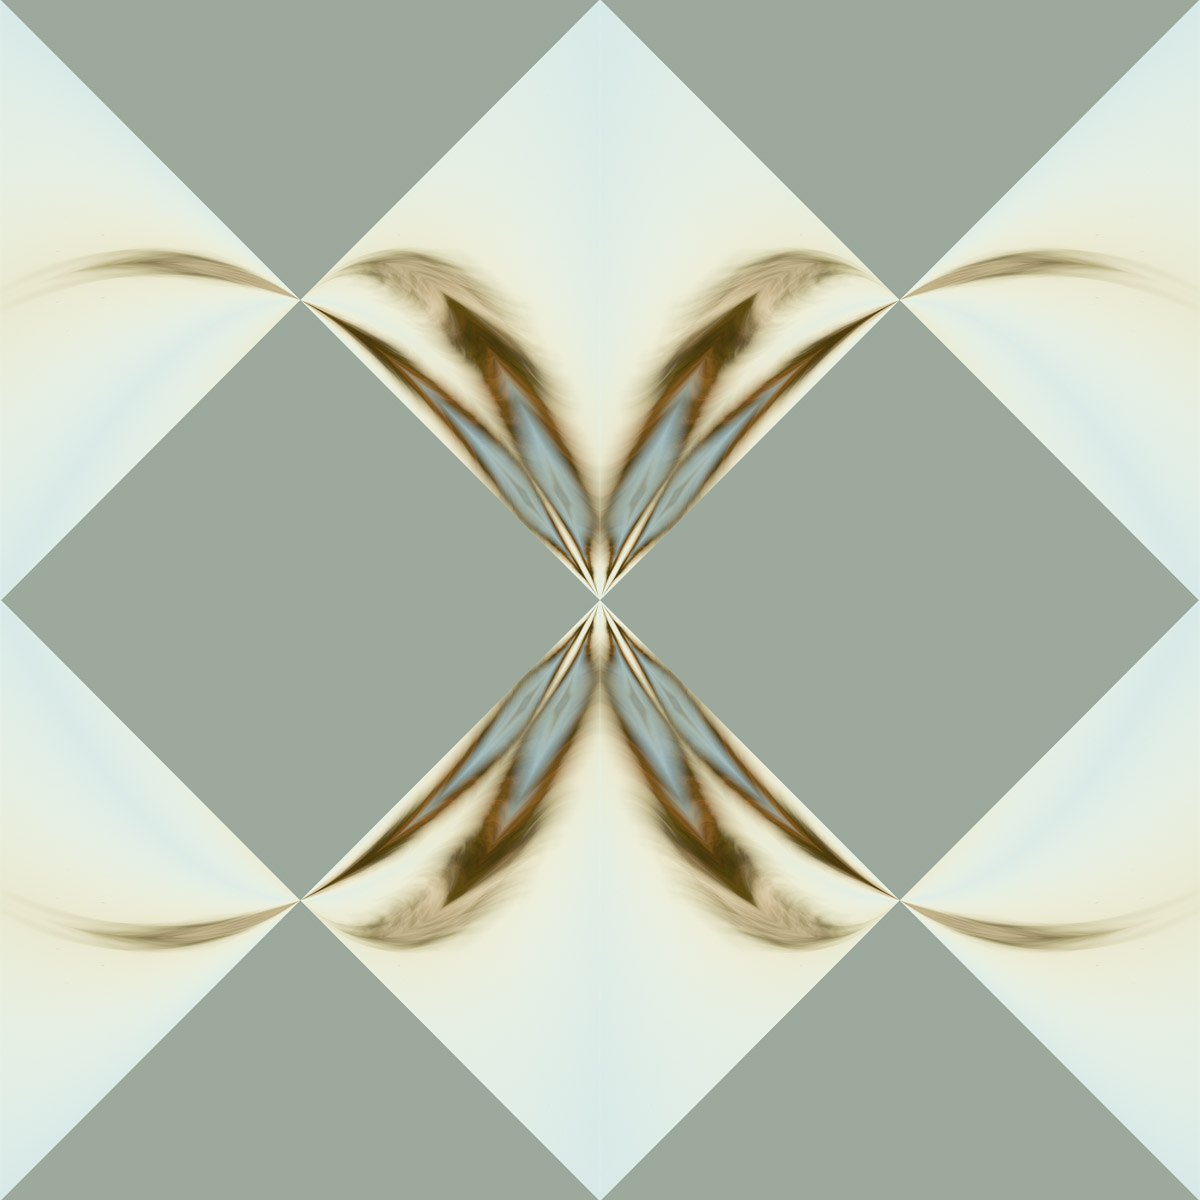 A picture of an abstract image with gold and white colors.